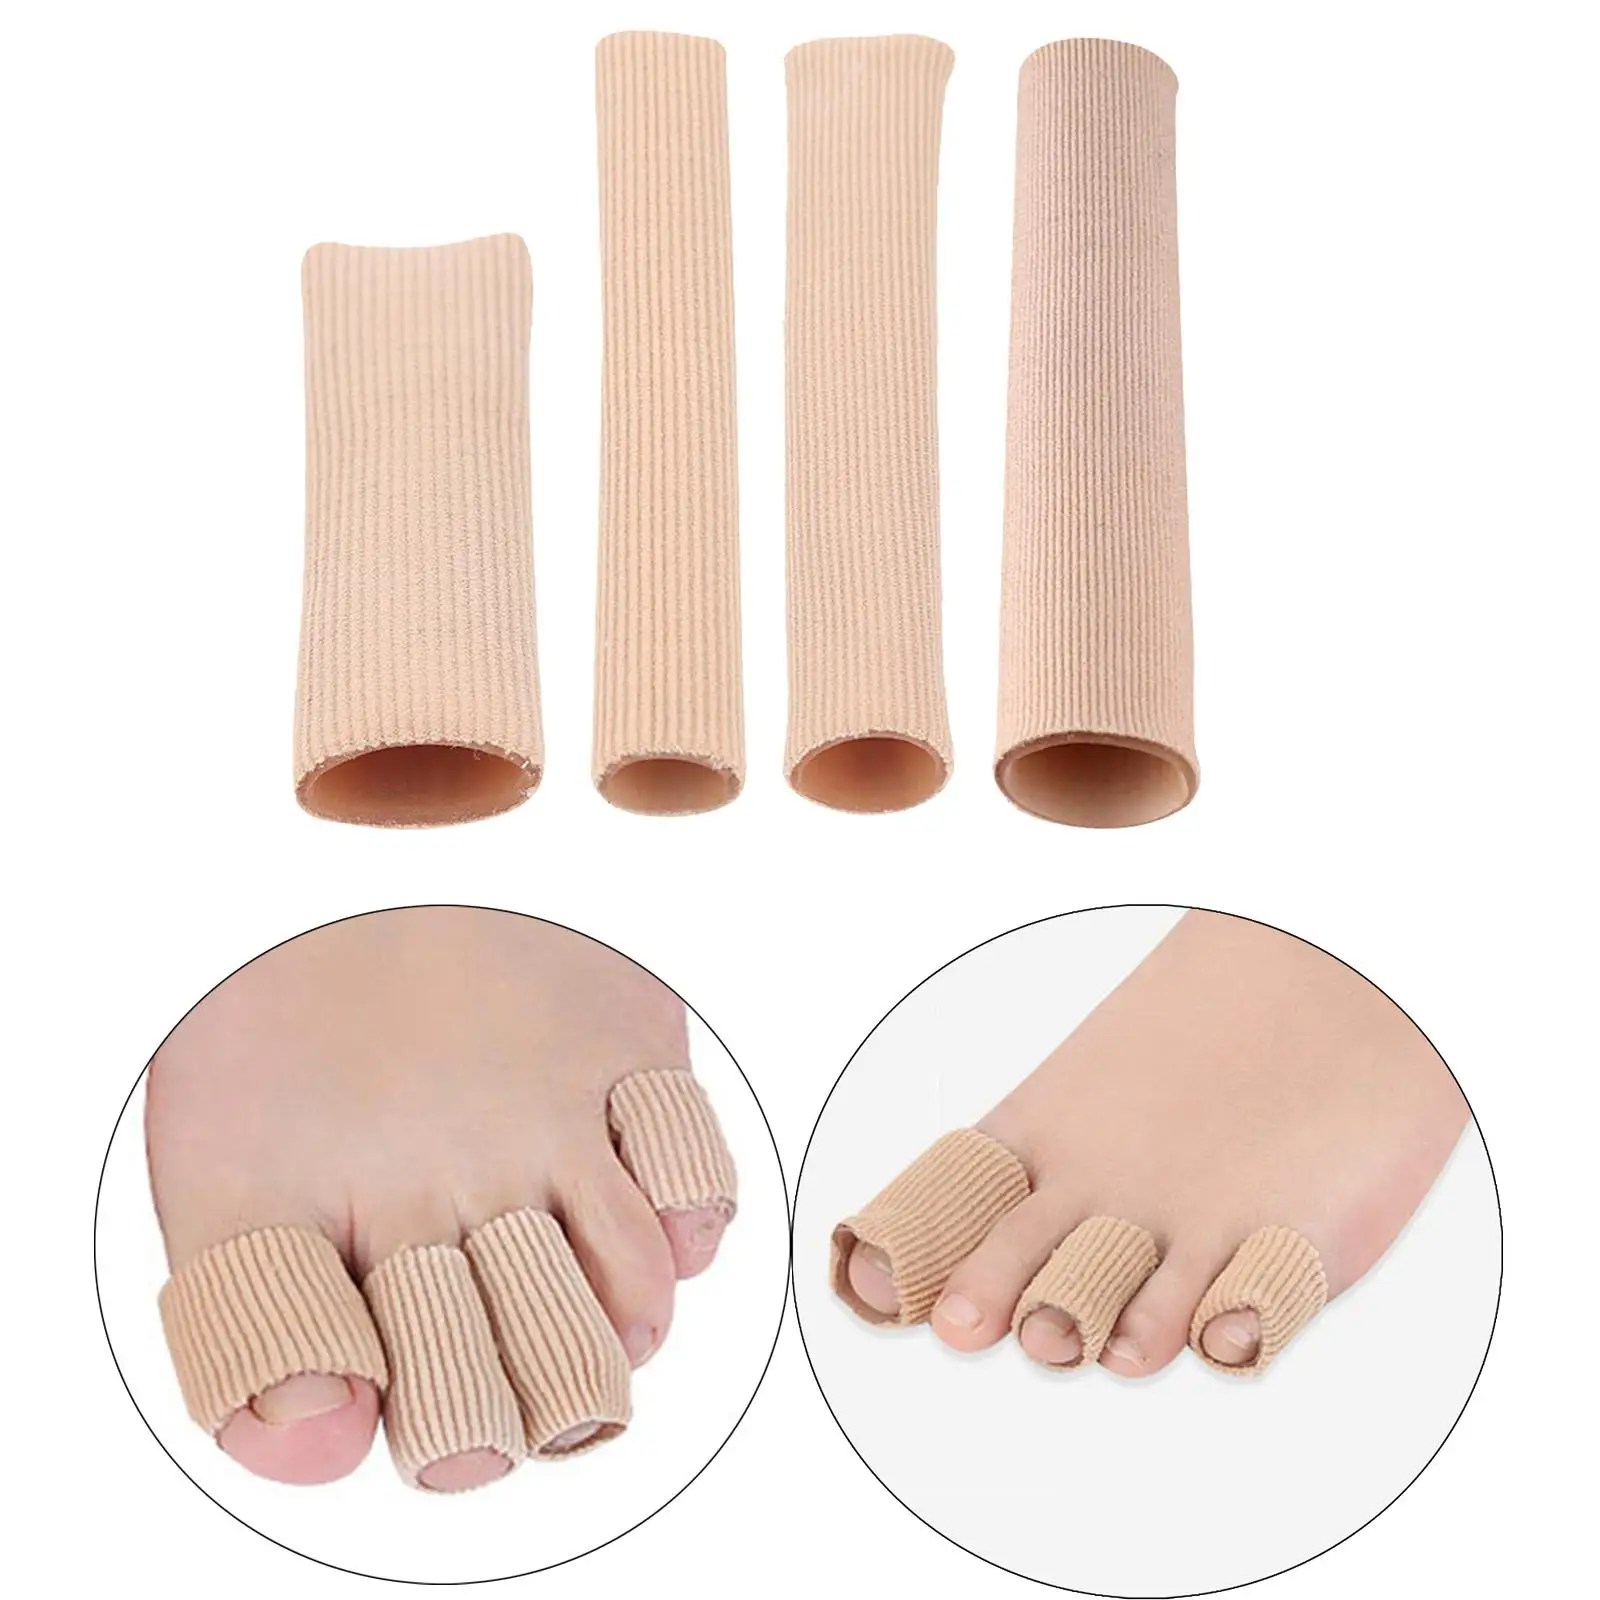 5x Practical Finger Toe Tube Protector Foot Men Compression Blister Bunion